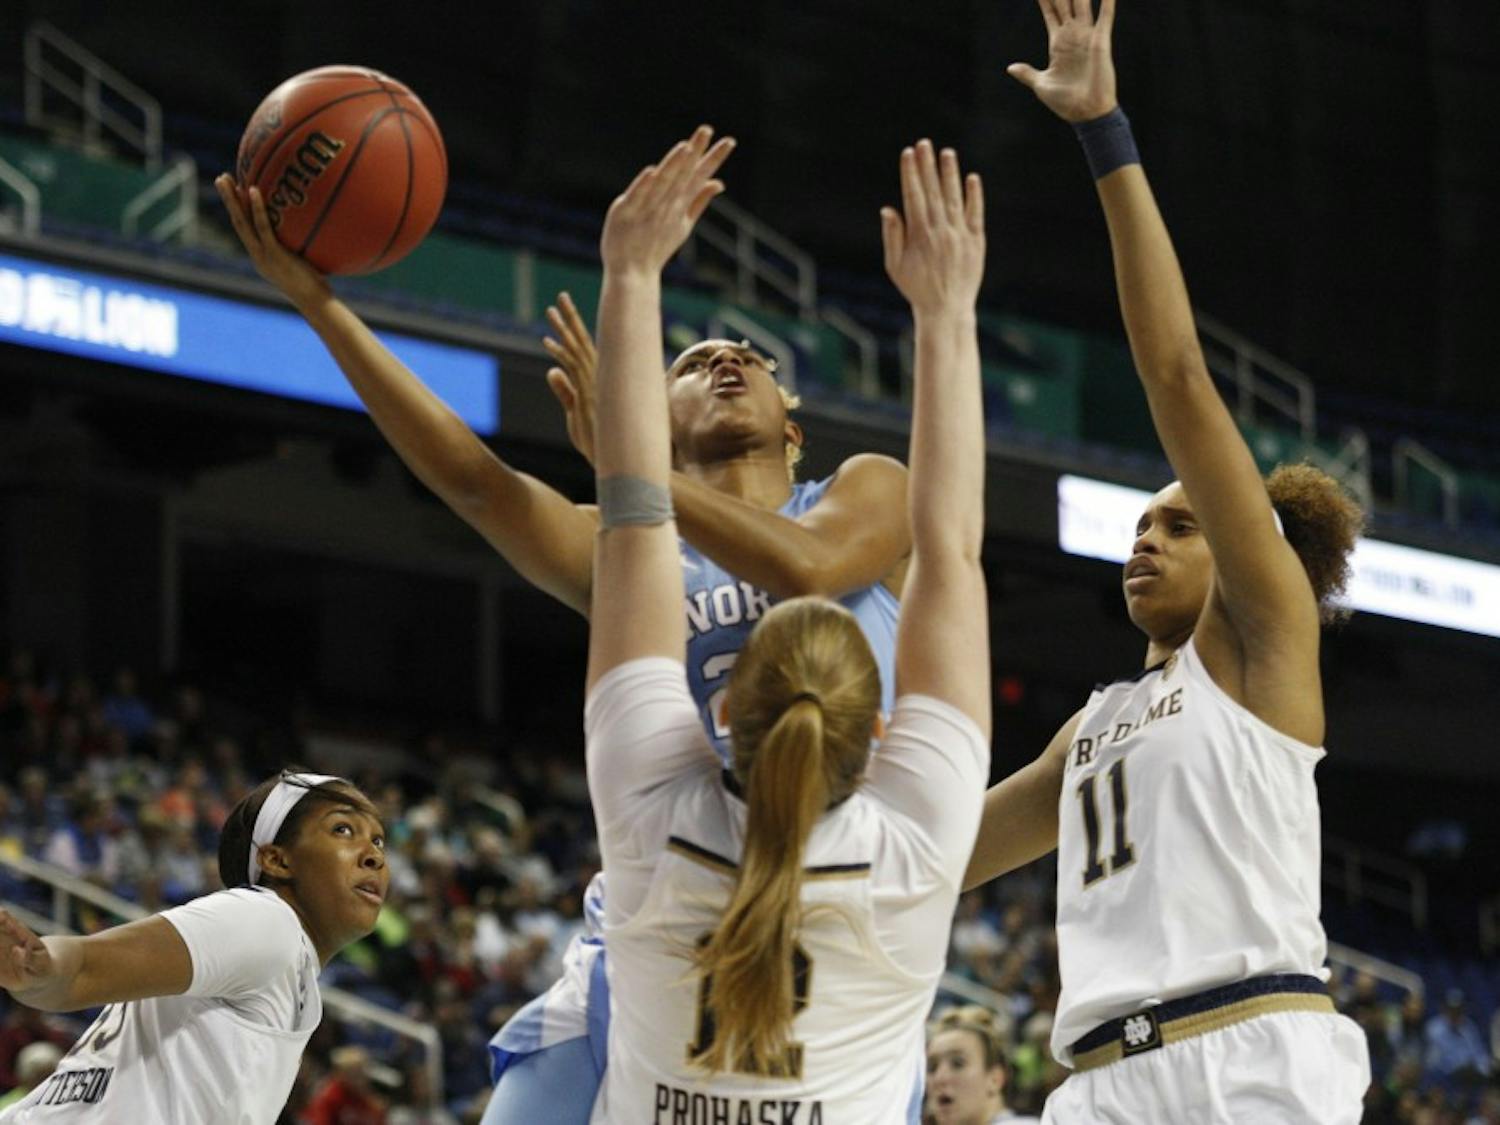 No. 8 UNC lost to No. 1 Notre Dame 95-77 in the second round of the ACC Tournament in Greensboro, N.C. on Friday, March 8, 2019.&nbsp;